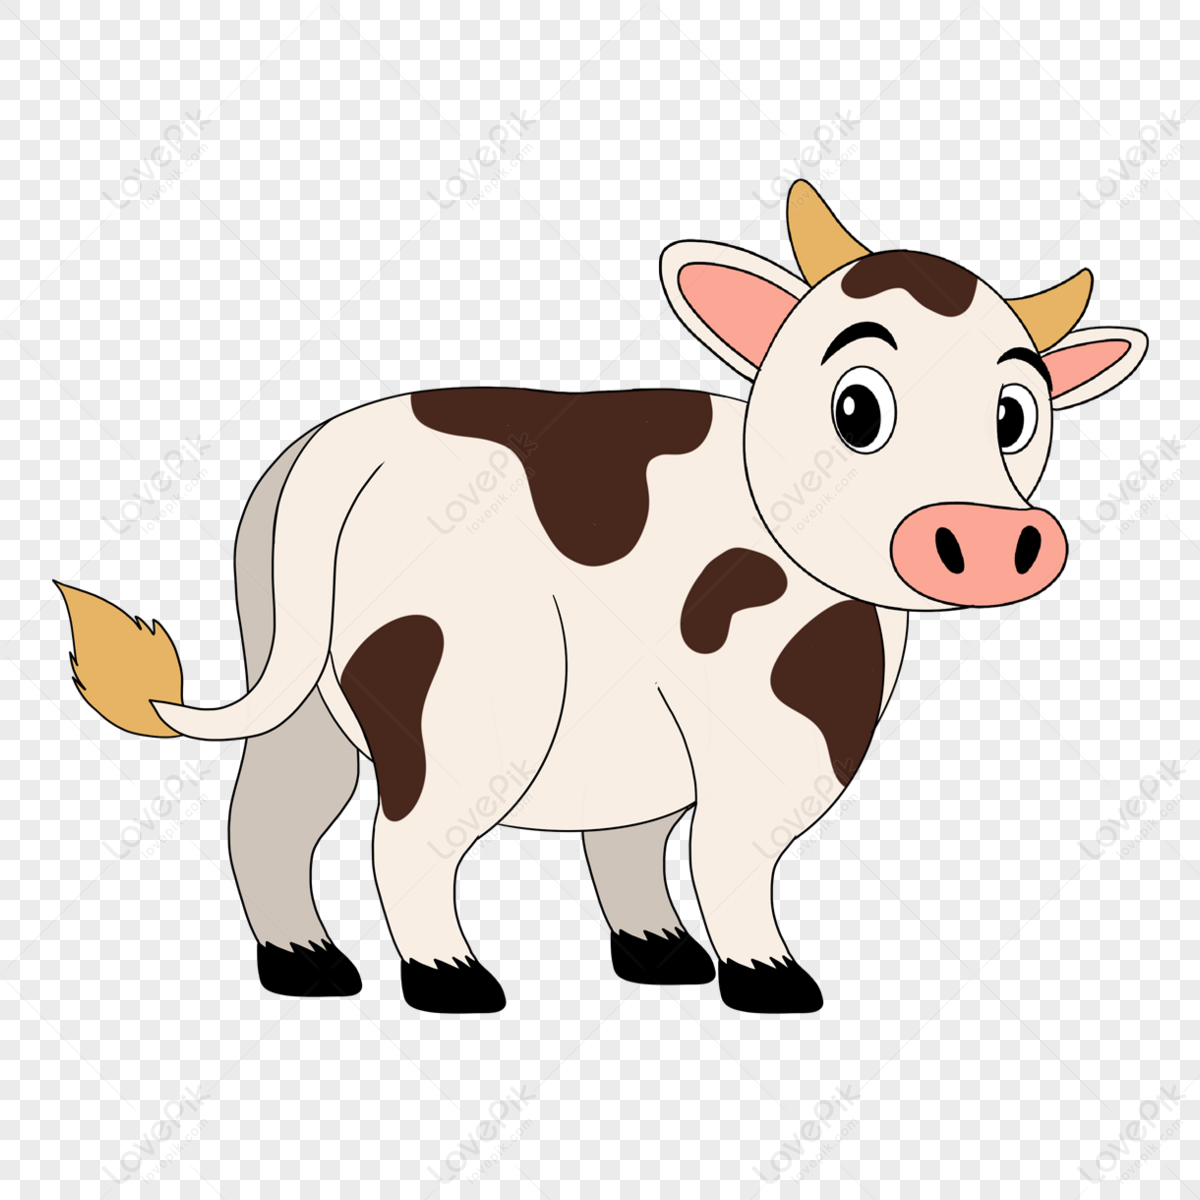 OC] I heard cows like to eat rice. Cute cow demands your rice supply :  r/LoveLive